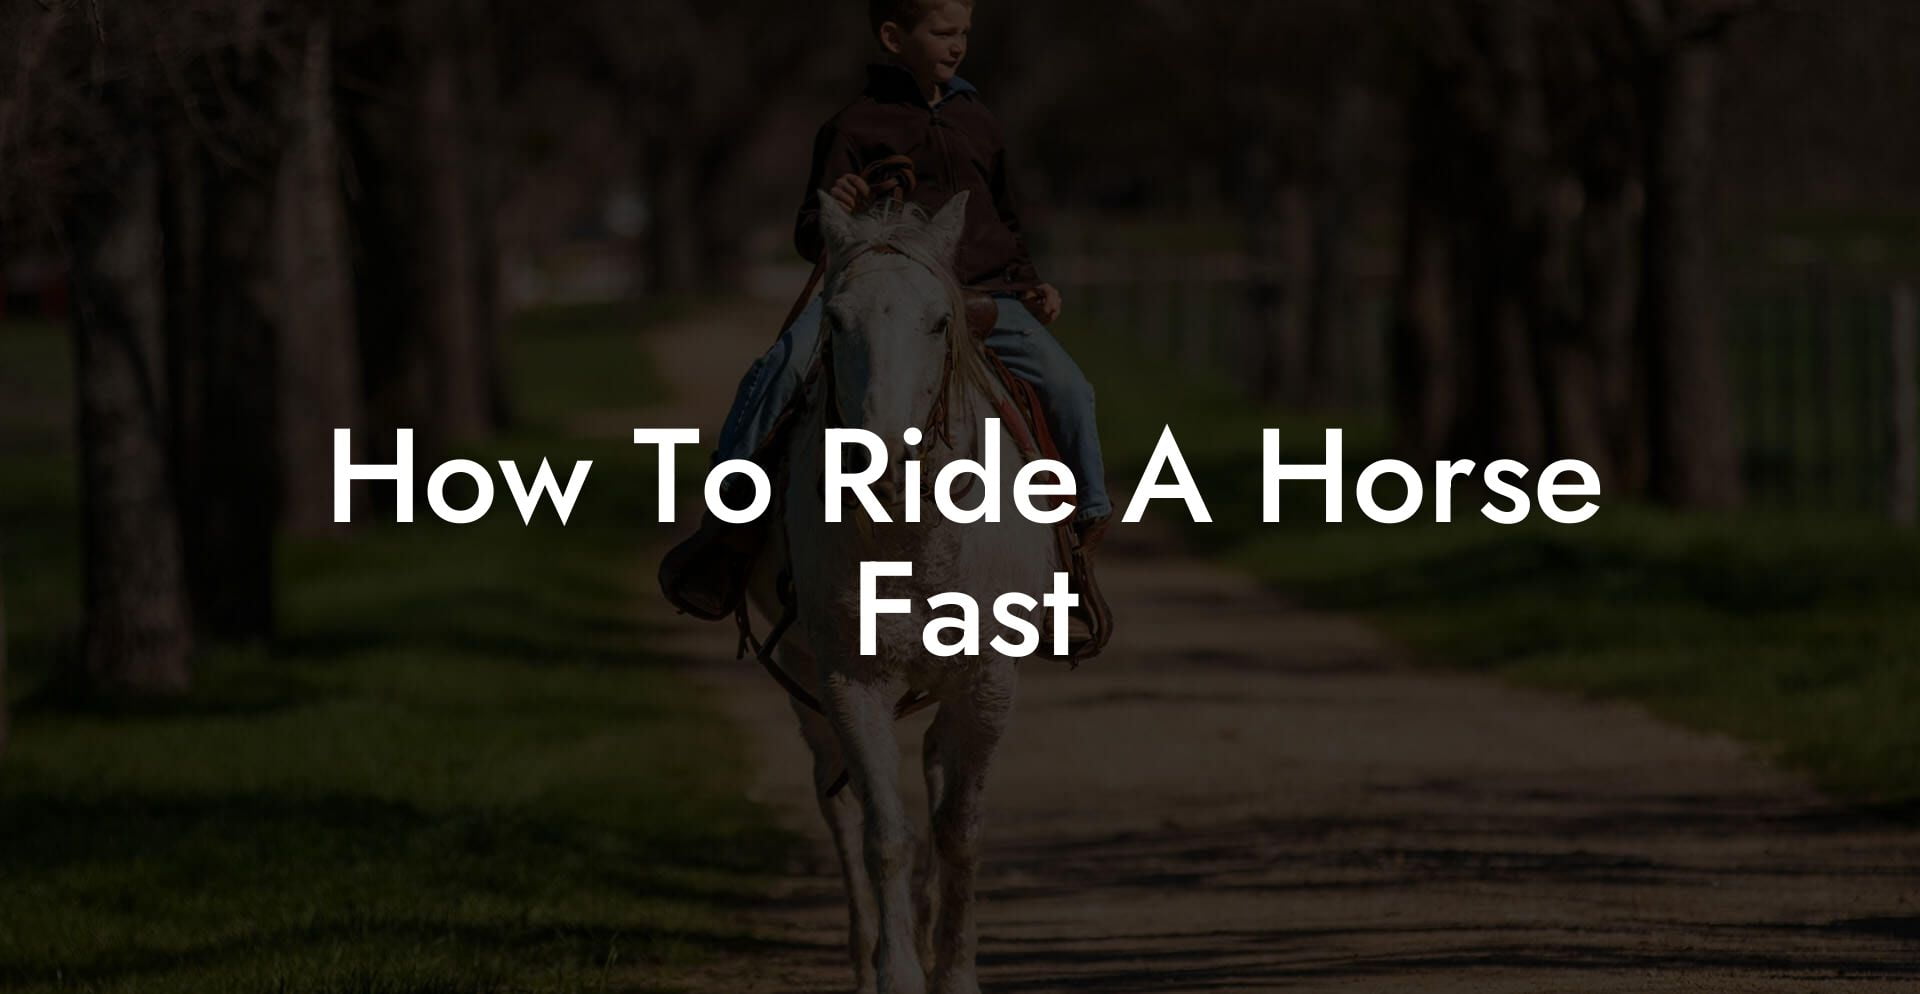 How To Ride A Horse Fast